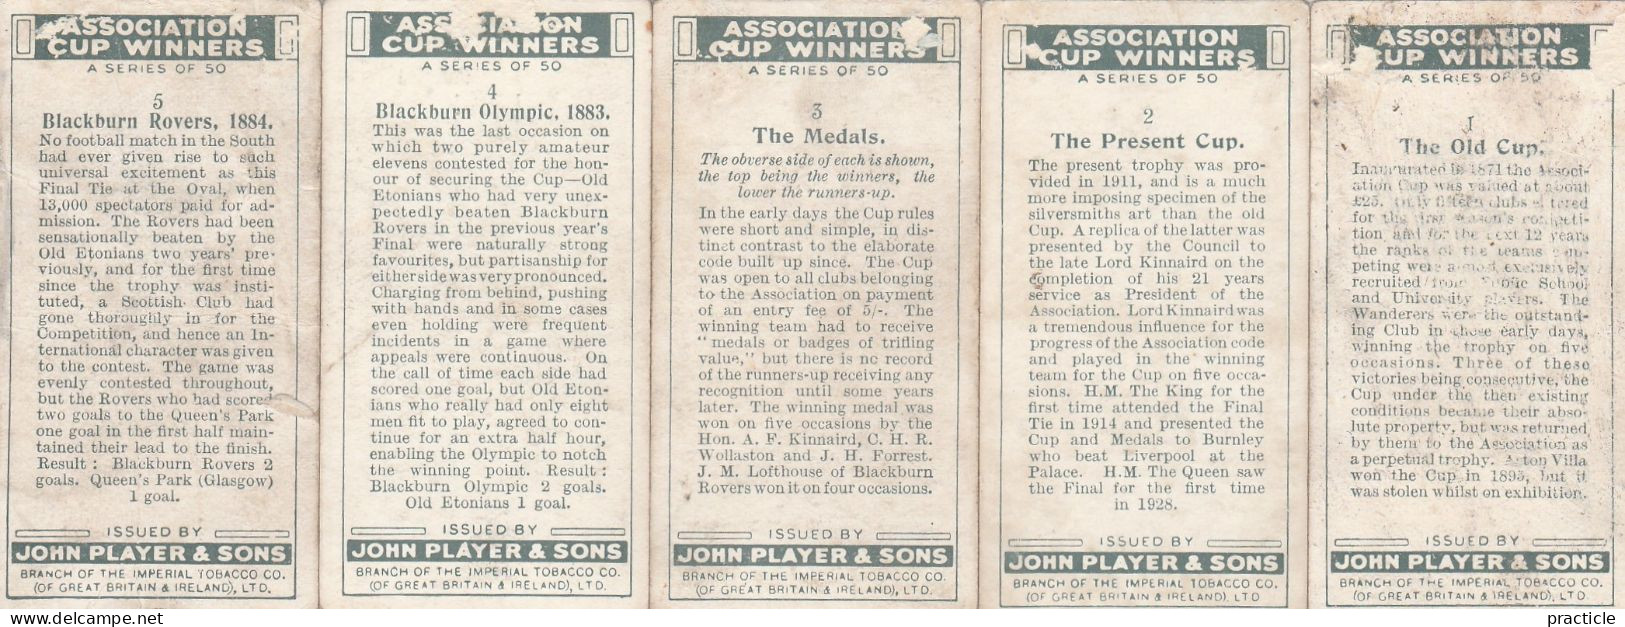 2704 Player’s Cigarettes Association Cup Winners Football Series All Cards Except No 32 39 And 49 - Player's